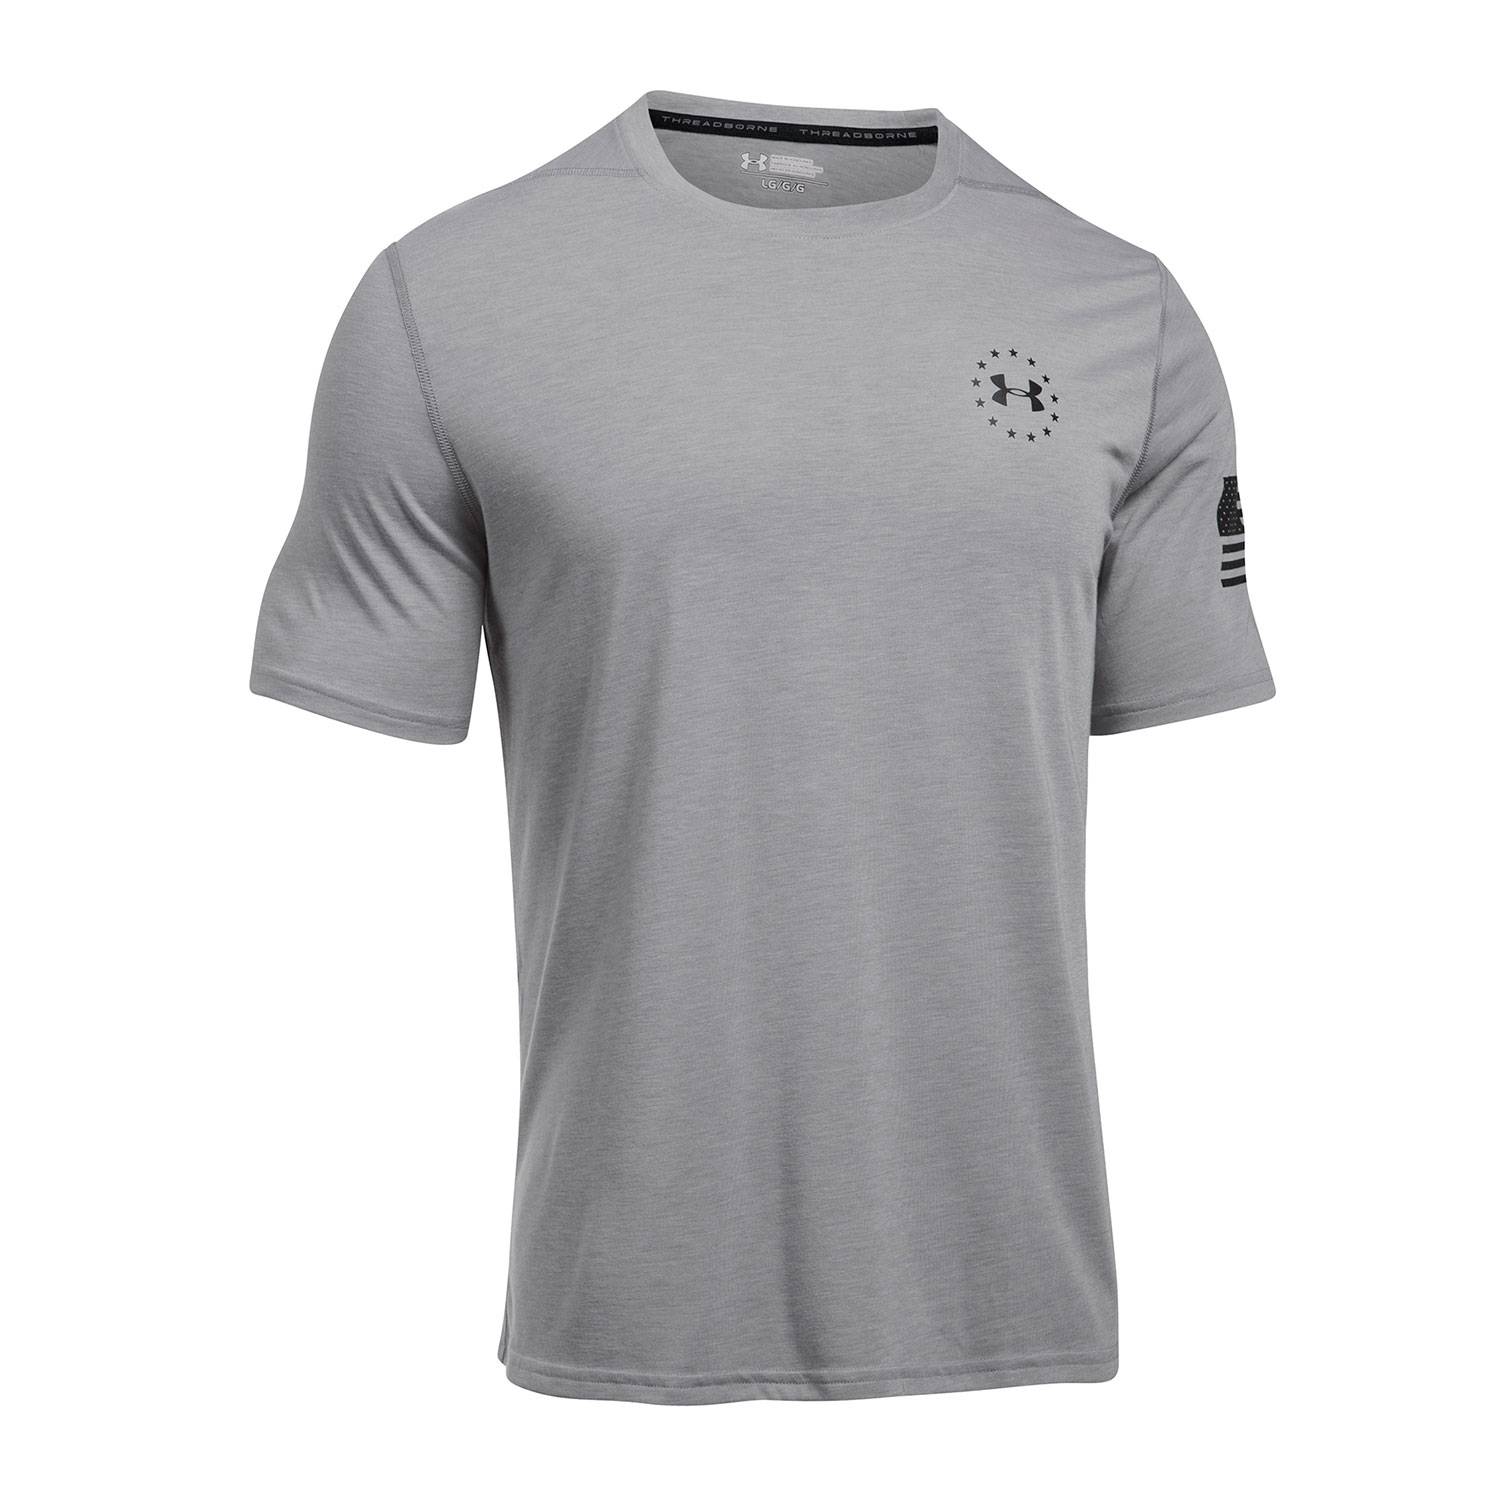 Brave Mens OD Green 3XL S/S T-Shirt Under armour 13275563903XL UA Freedom Free 